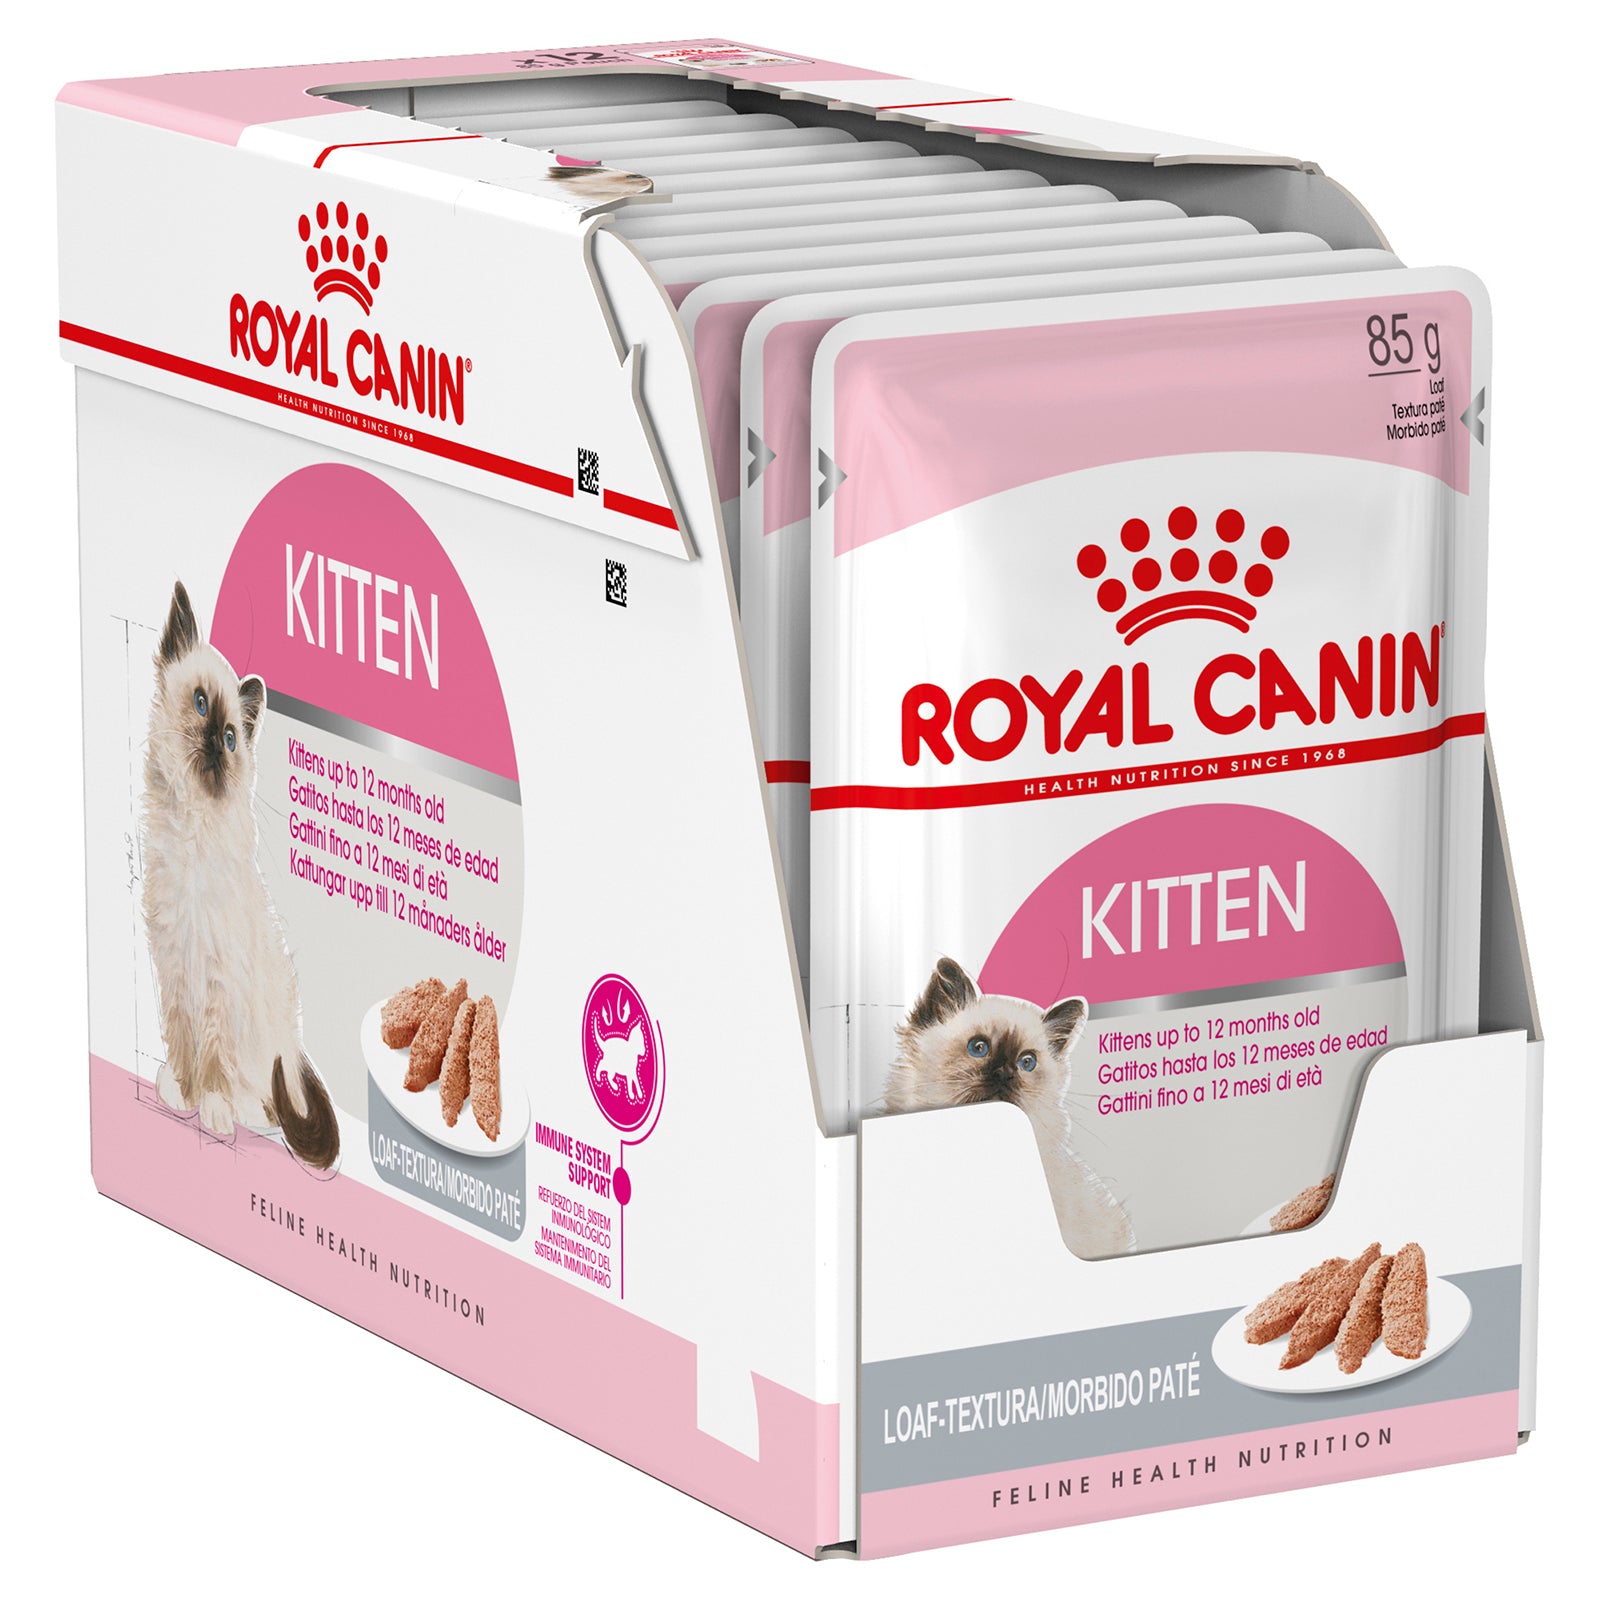 Royal Canin Cat Food Pouch Kitten Loaf